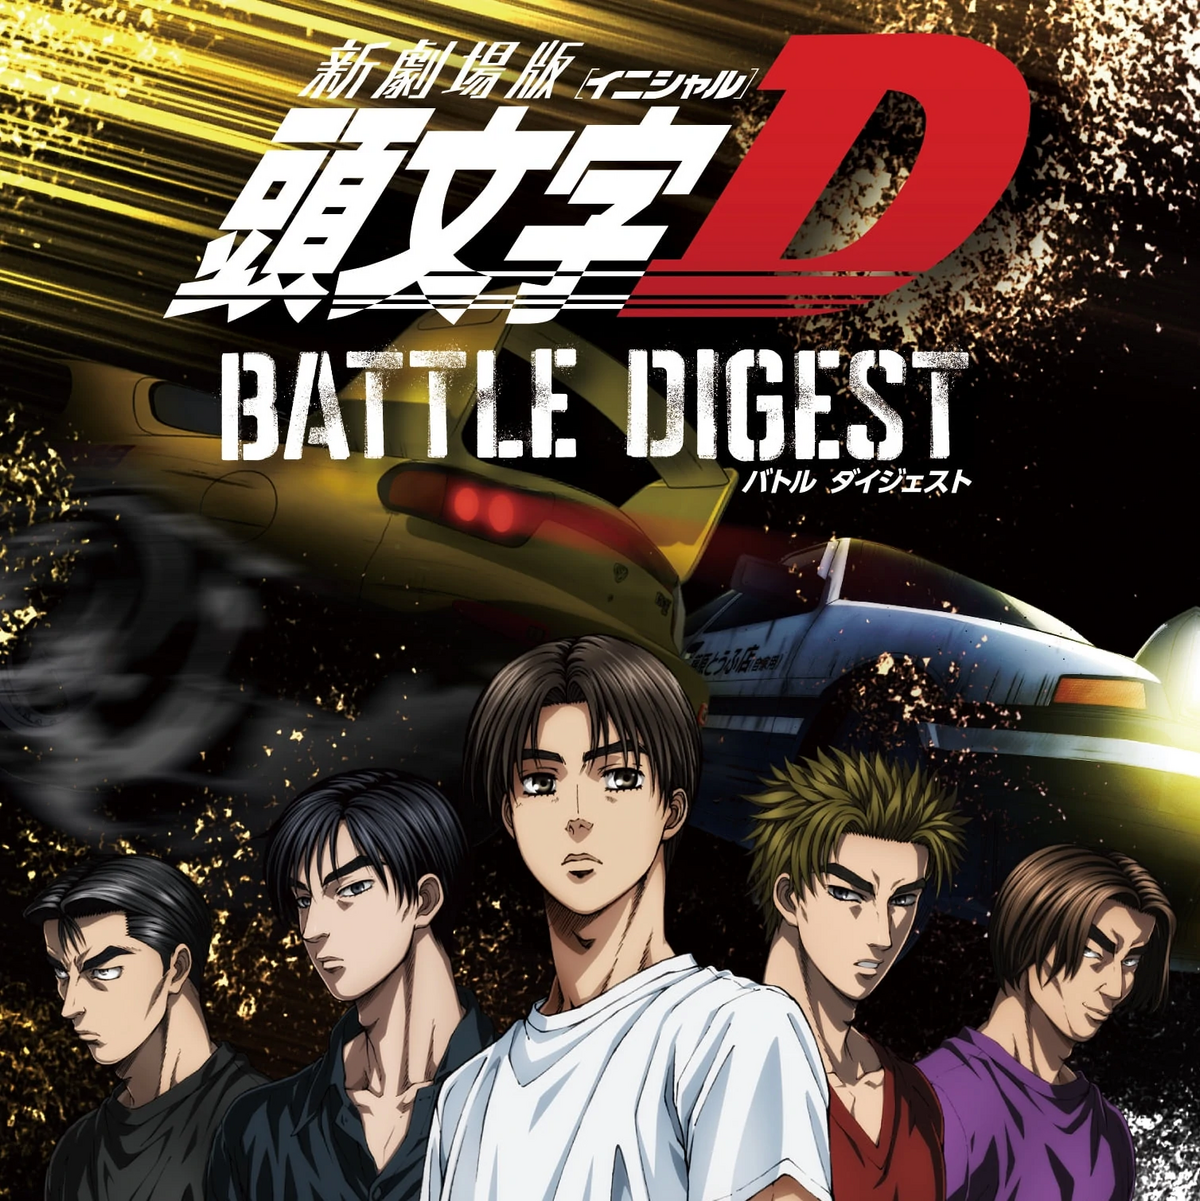 INITIAL D STAGE 1-6 + 3 MOVIE + 3 EXTRA STAGE + 3 BATTLE STAGE